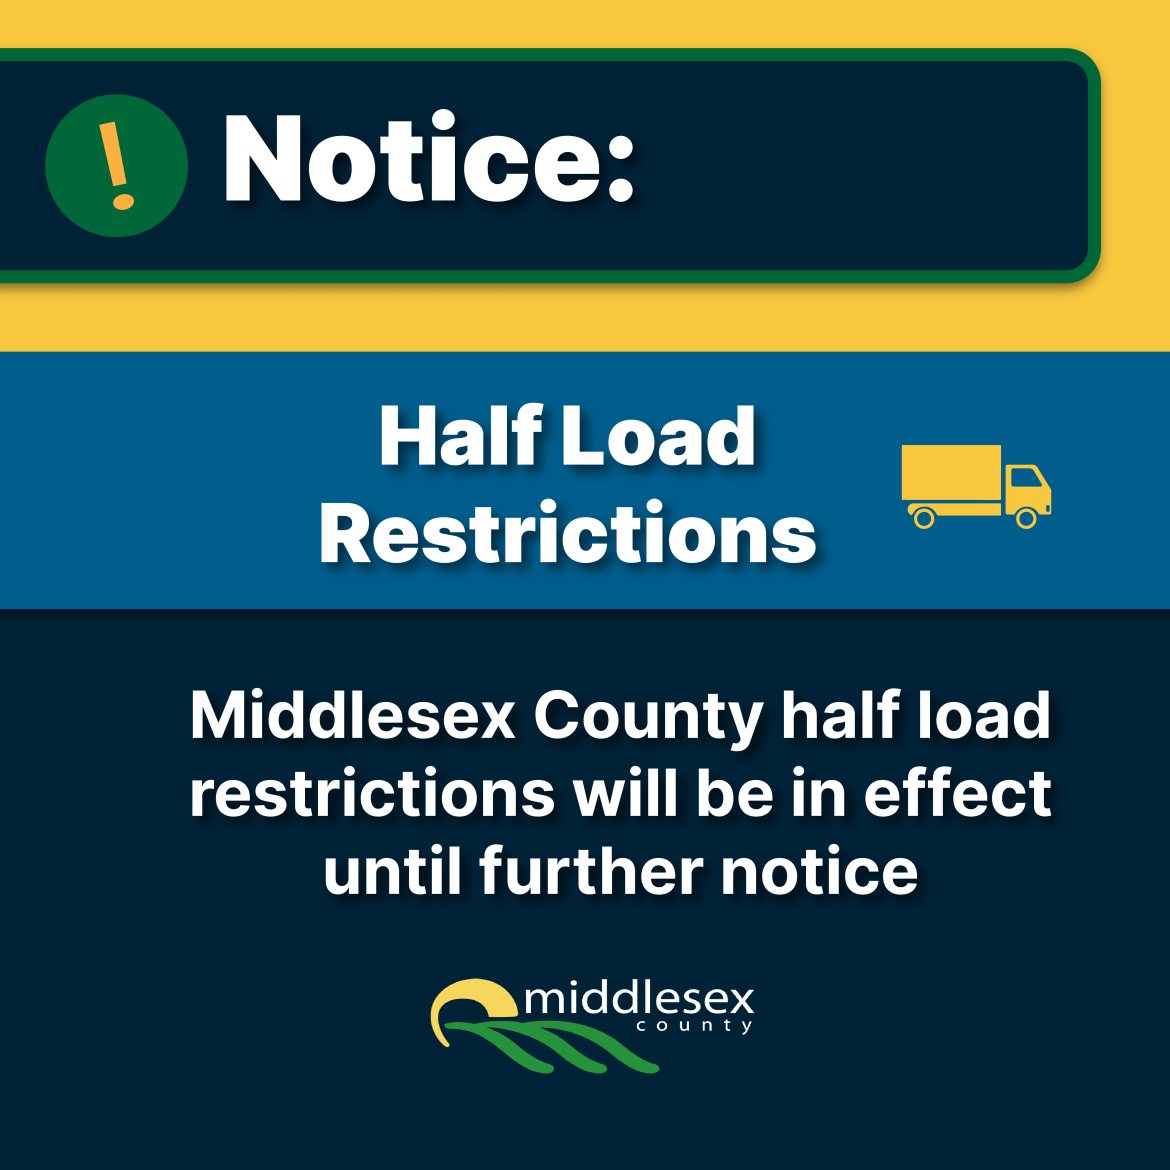 half load restrictions graphic